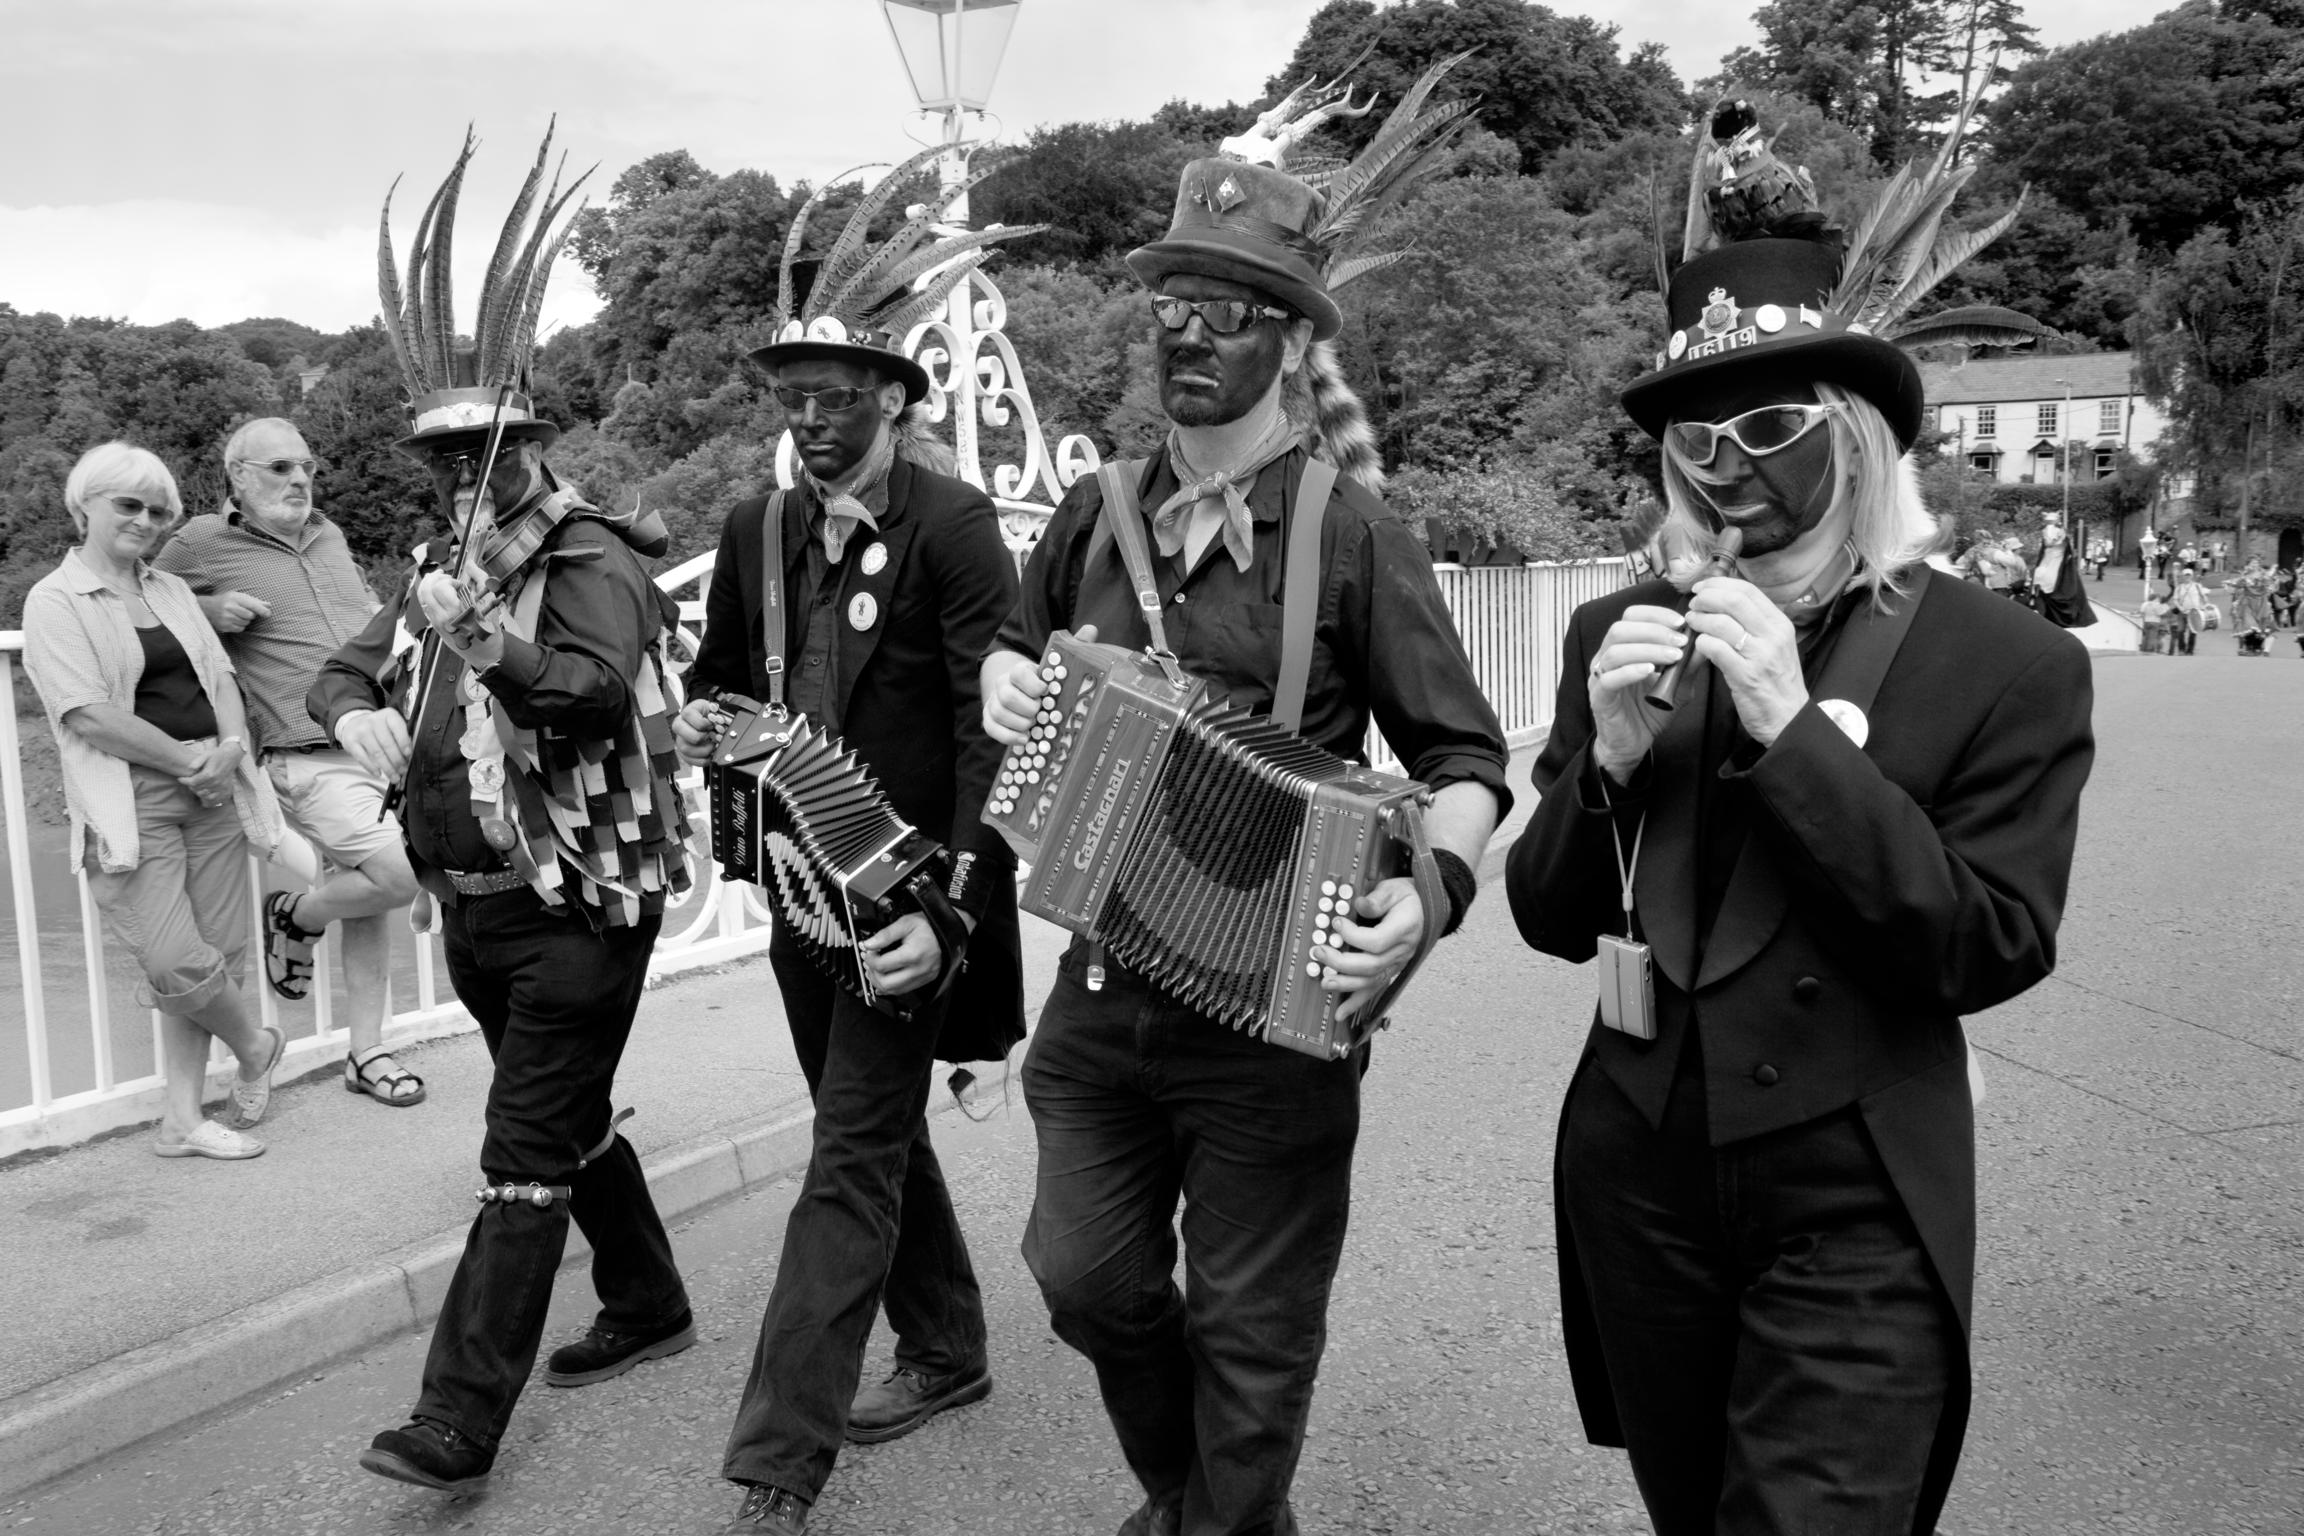 On 5th July 500 English in the guise of Morris Dancers and led by a marching band invaded Wales over Chepstow Bridge. Chepstow Festival, Wales